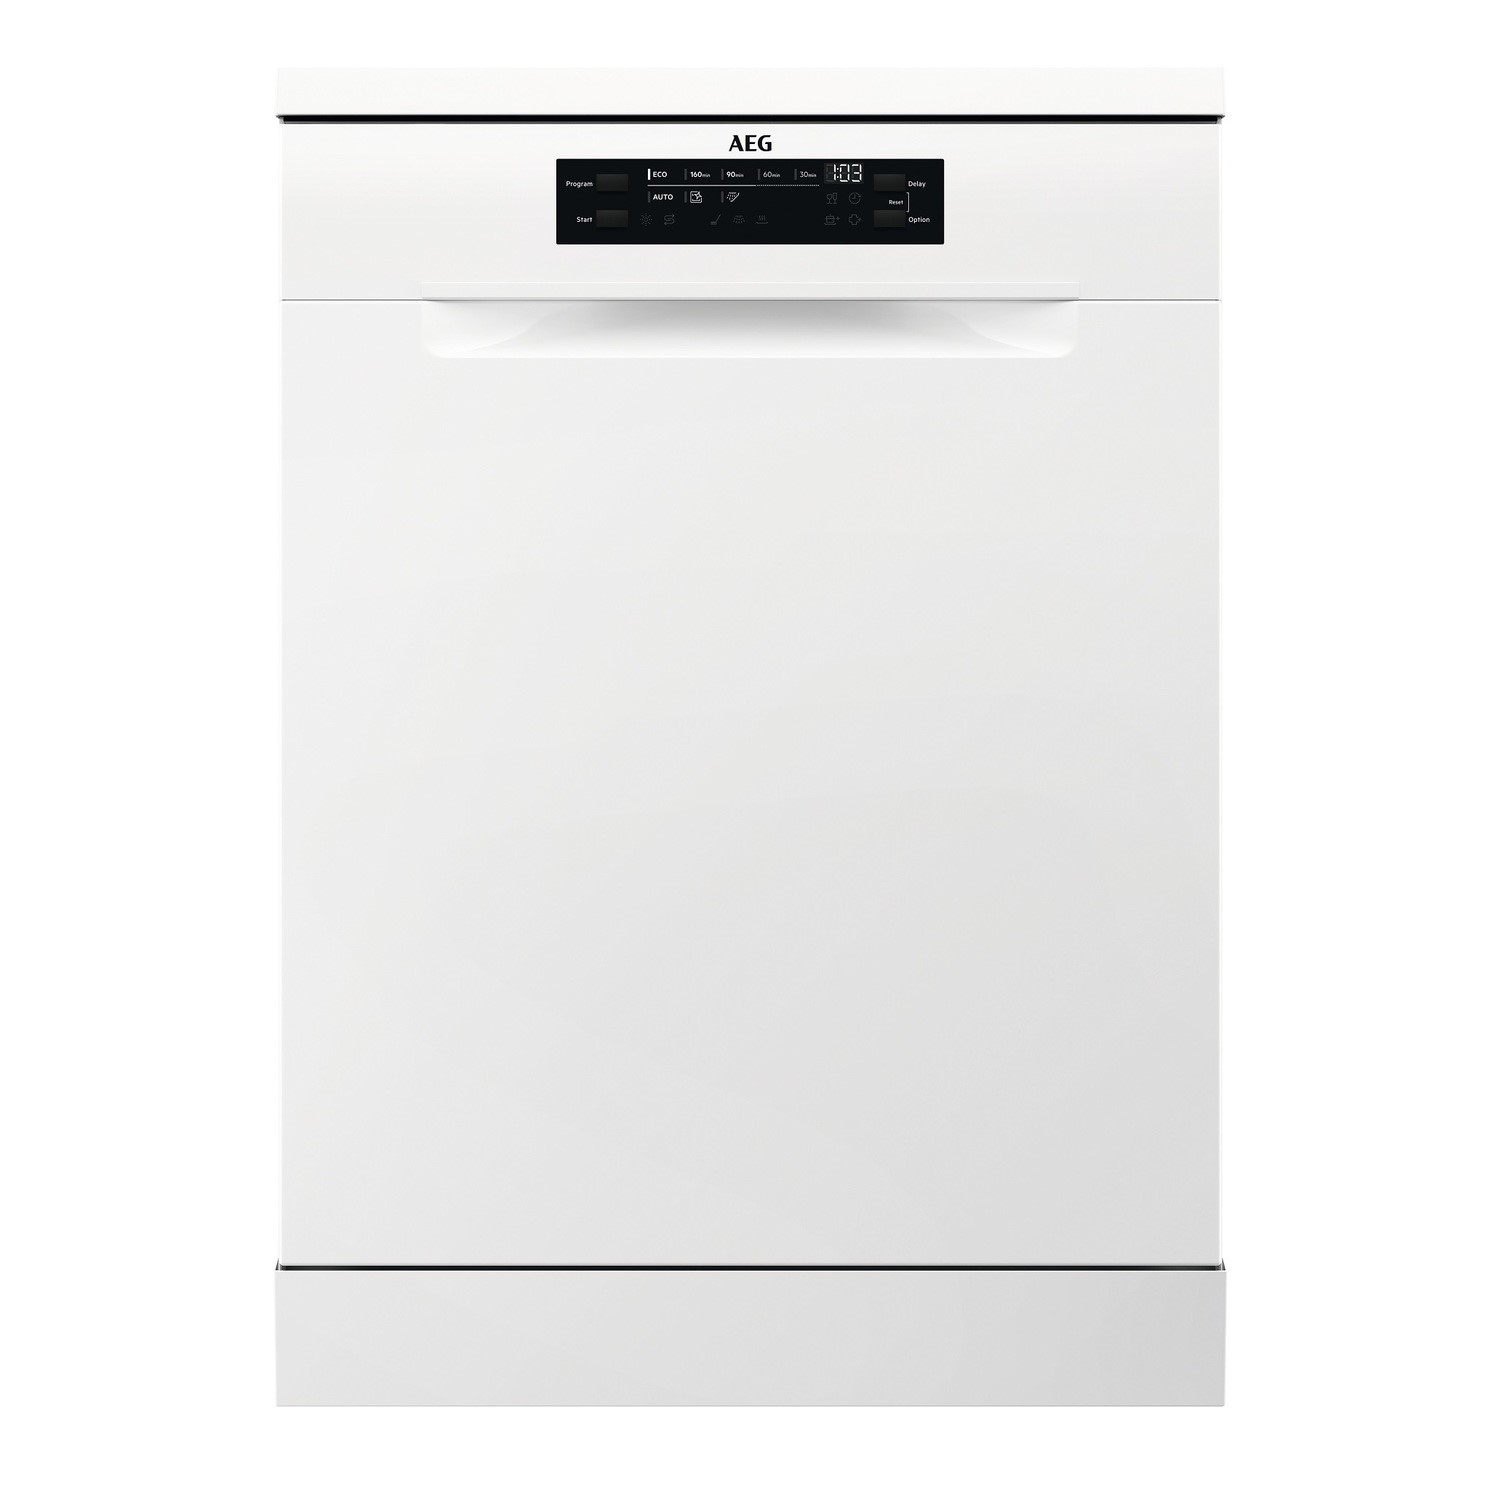 Photos - Other for Computer AEG Series 6000 13 Place Settings Freestanding Dishwasher - White 91151421 